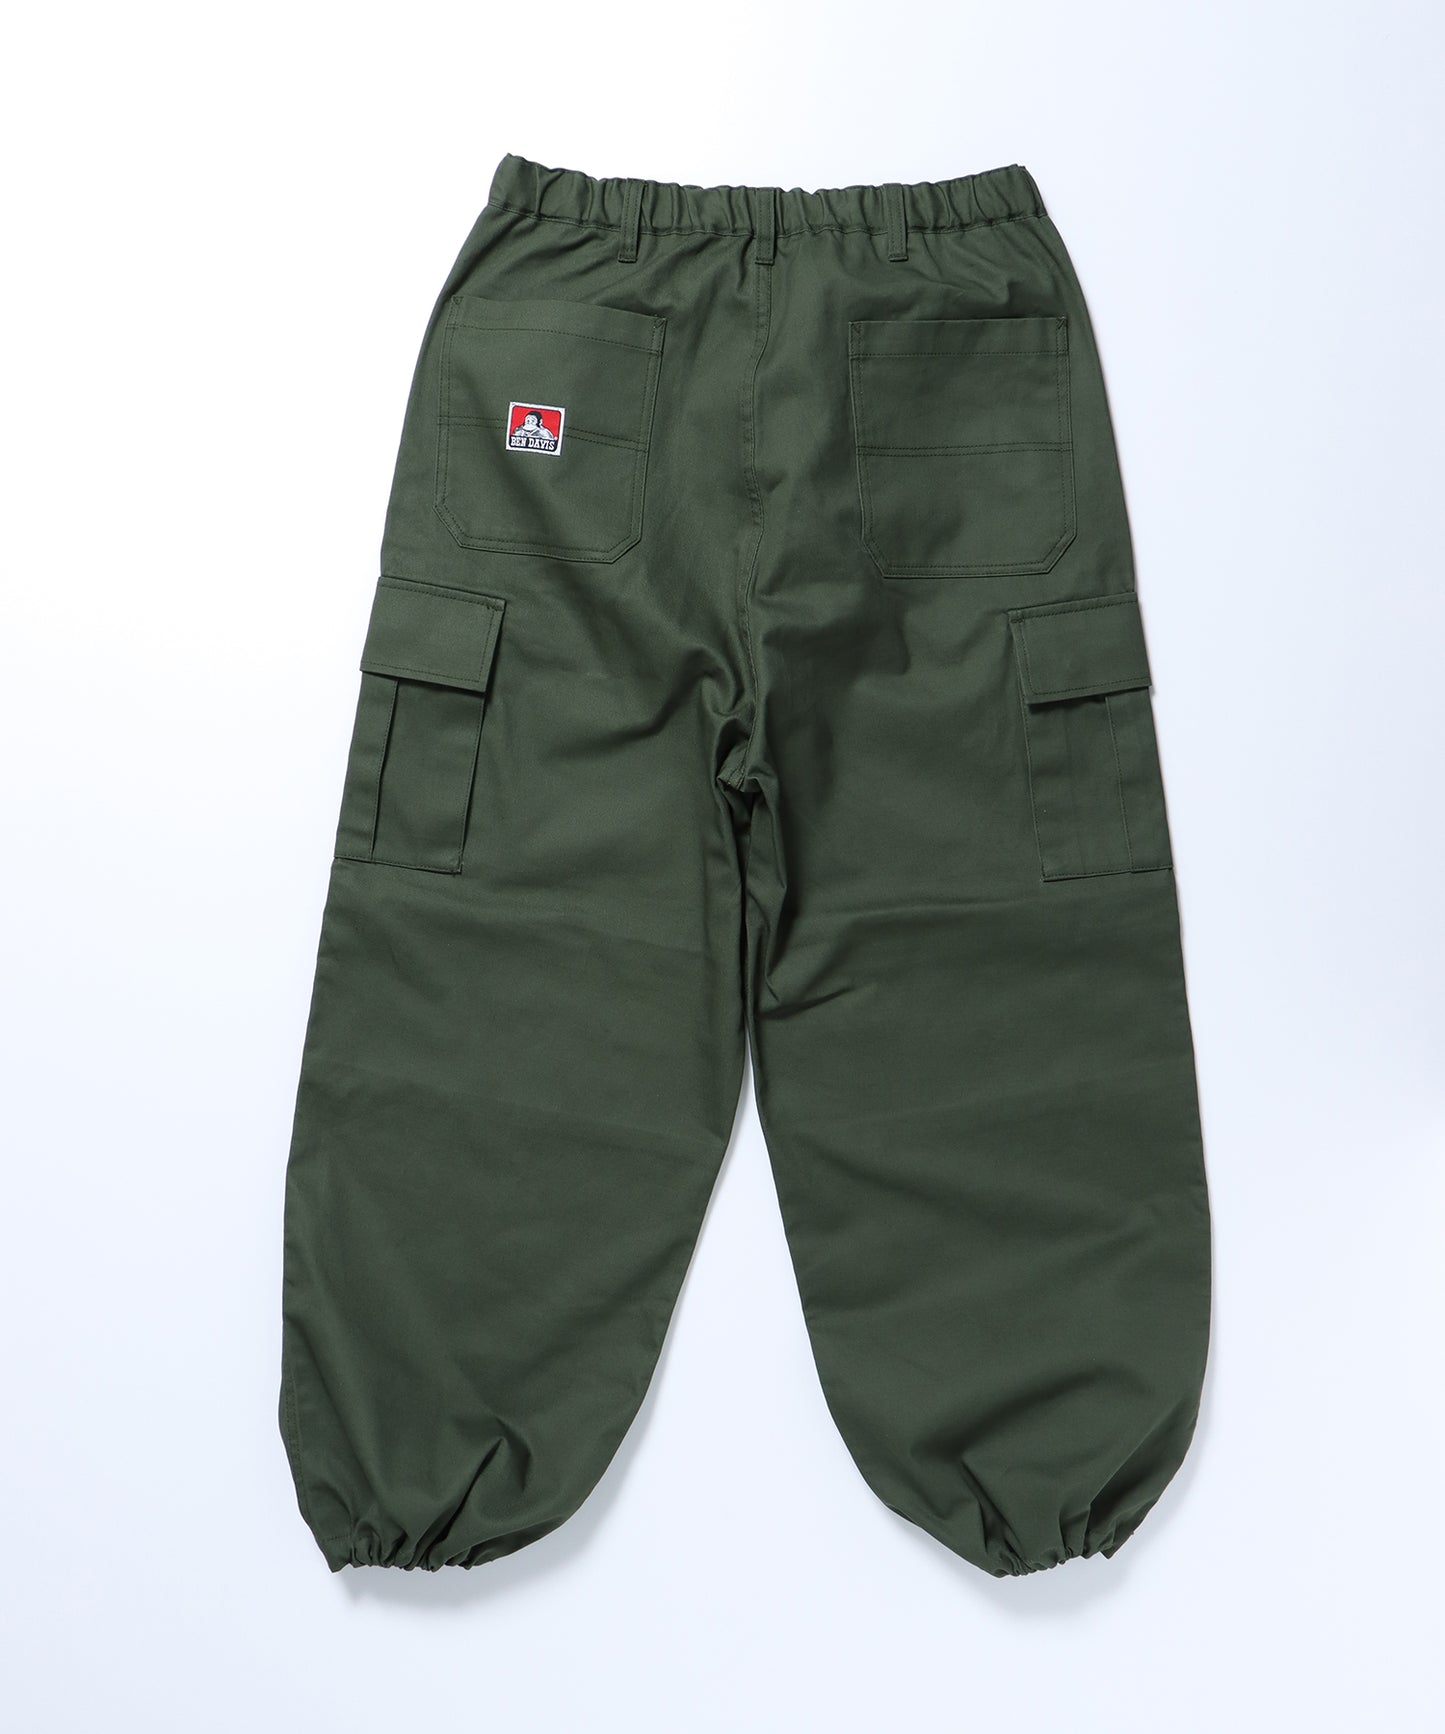 SNOW WORKERS PANTS / ルーズシルエット ワーク カラースノーパンツ 柄82